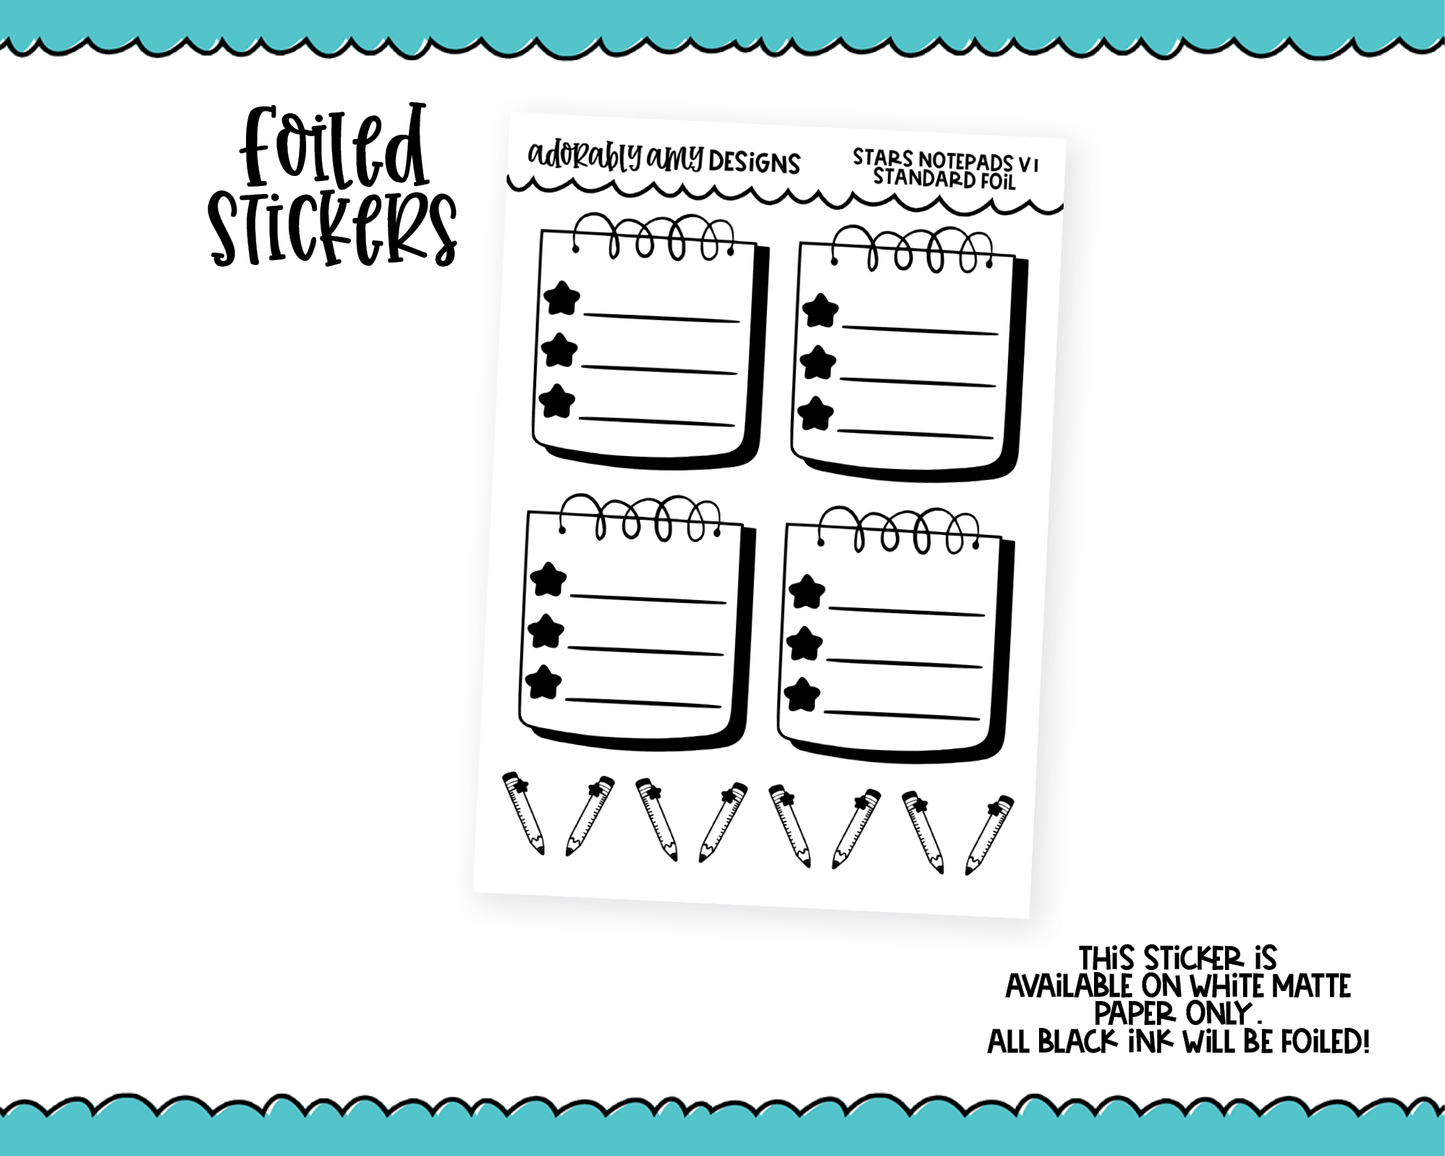 Foiled Star Notepads List Boxes V1 Planner Stickers for any Planner or Insert